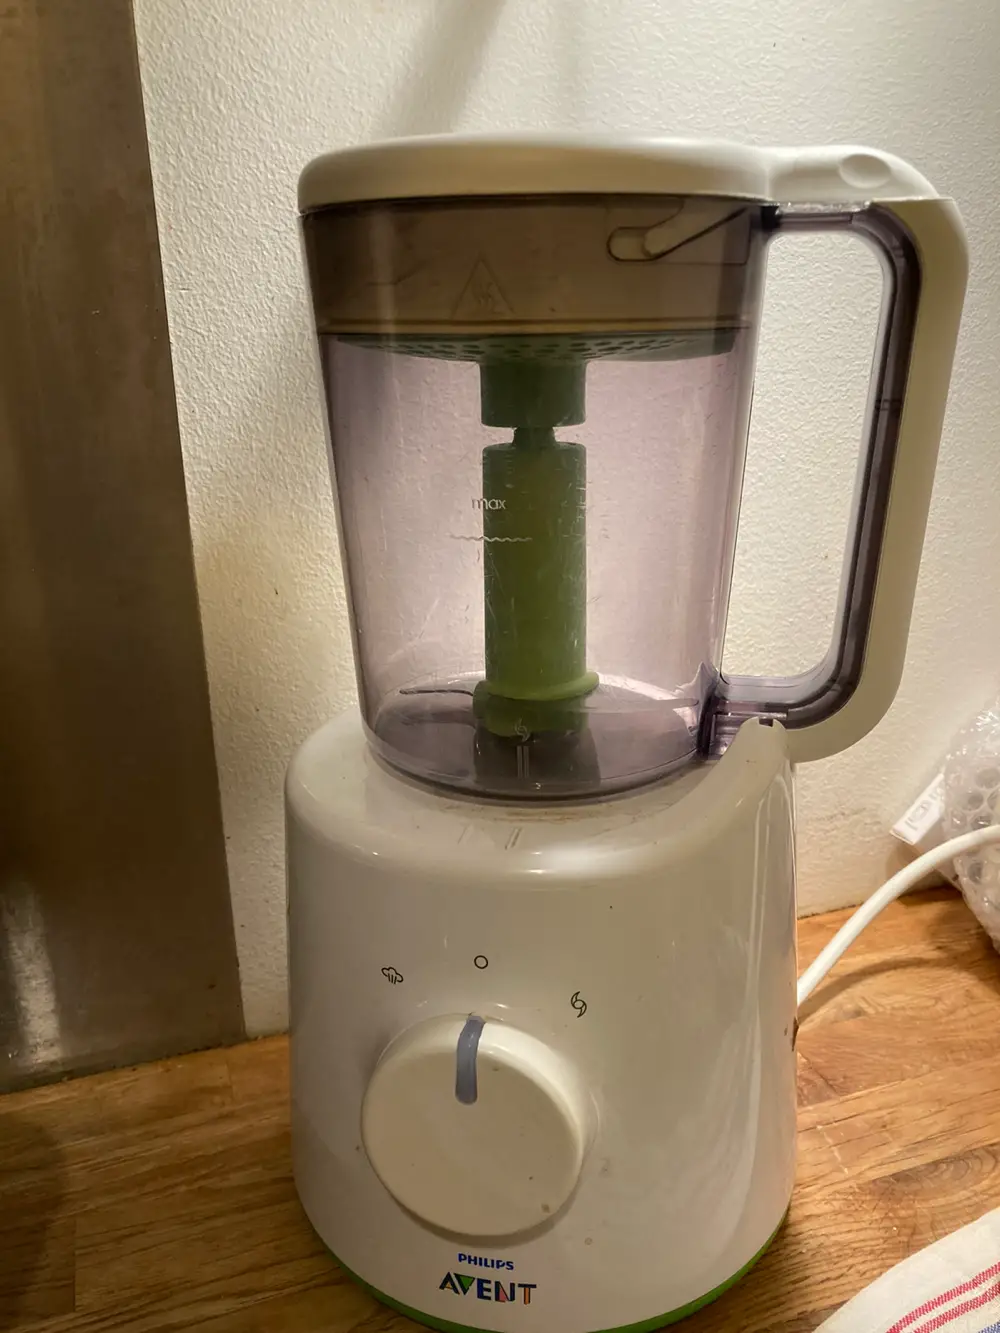 Philips AVENT Baby cooker